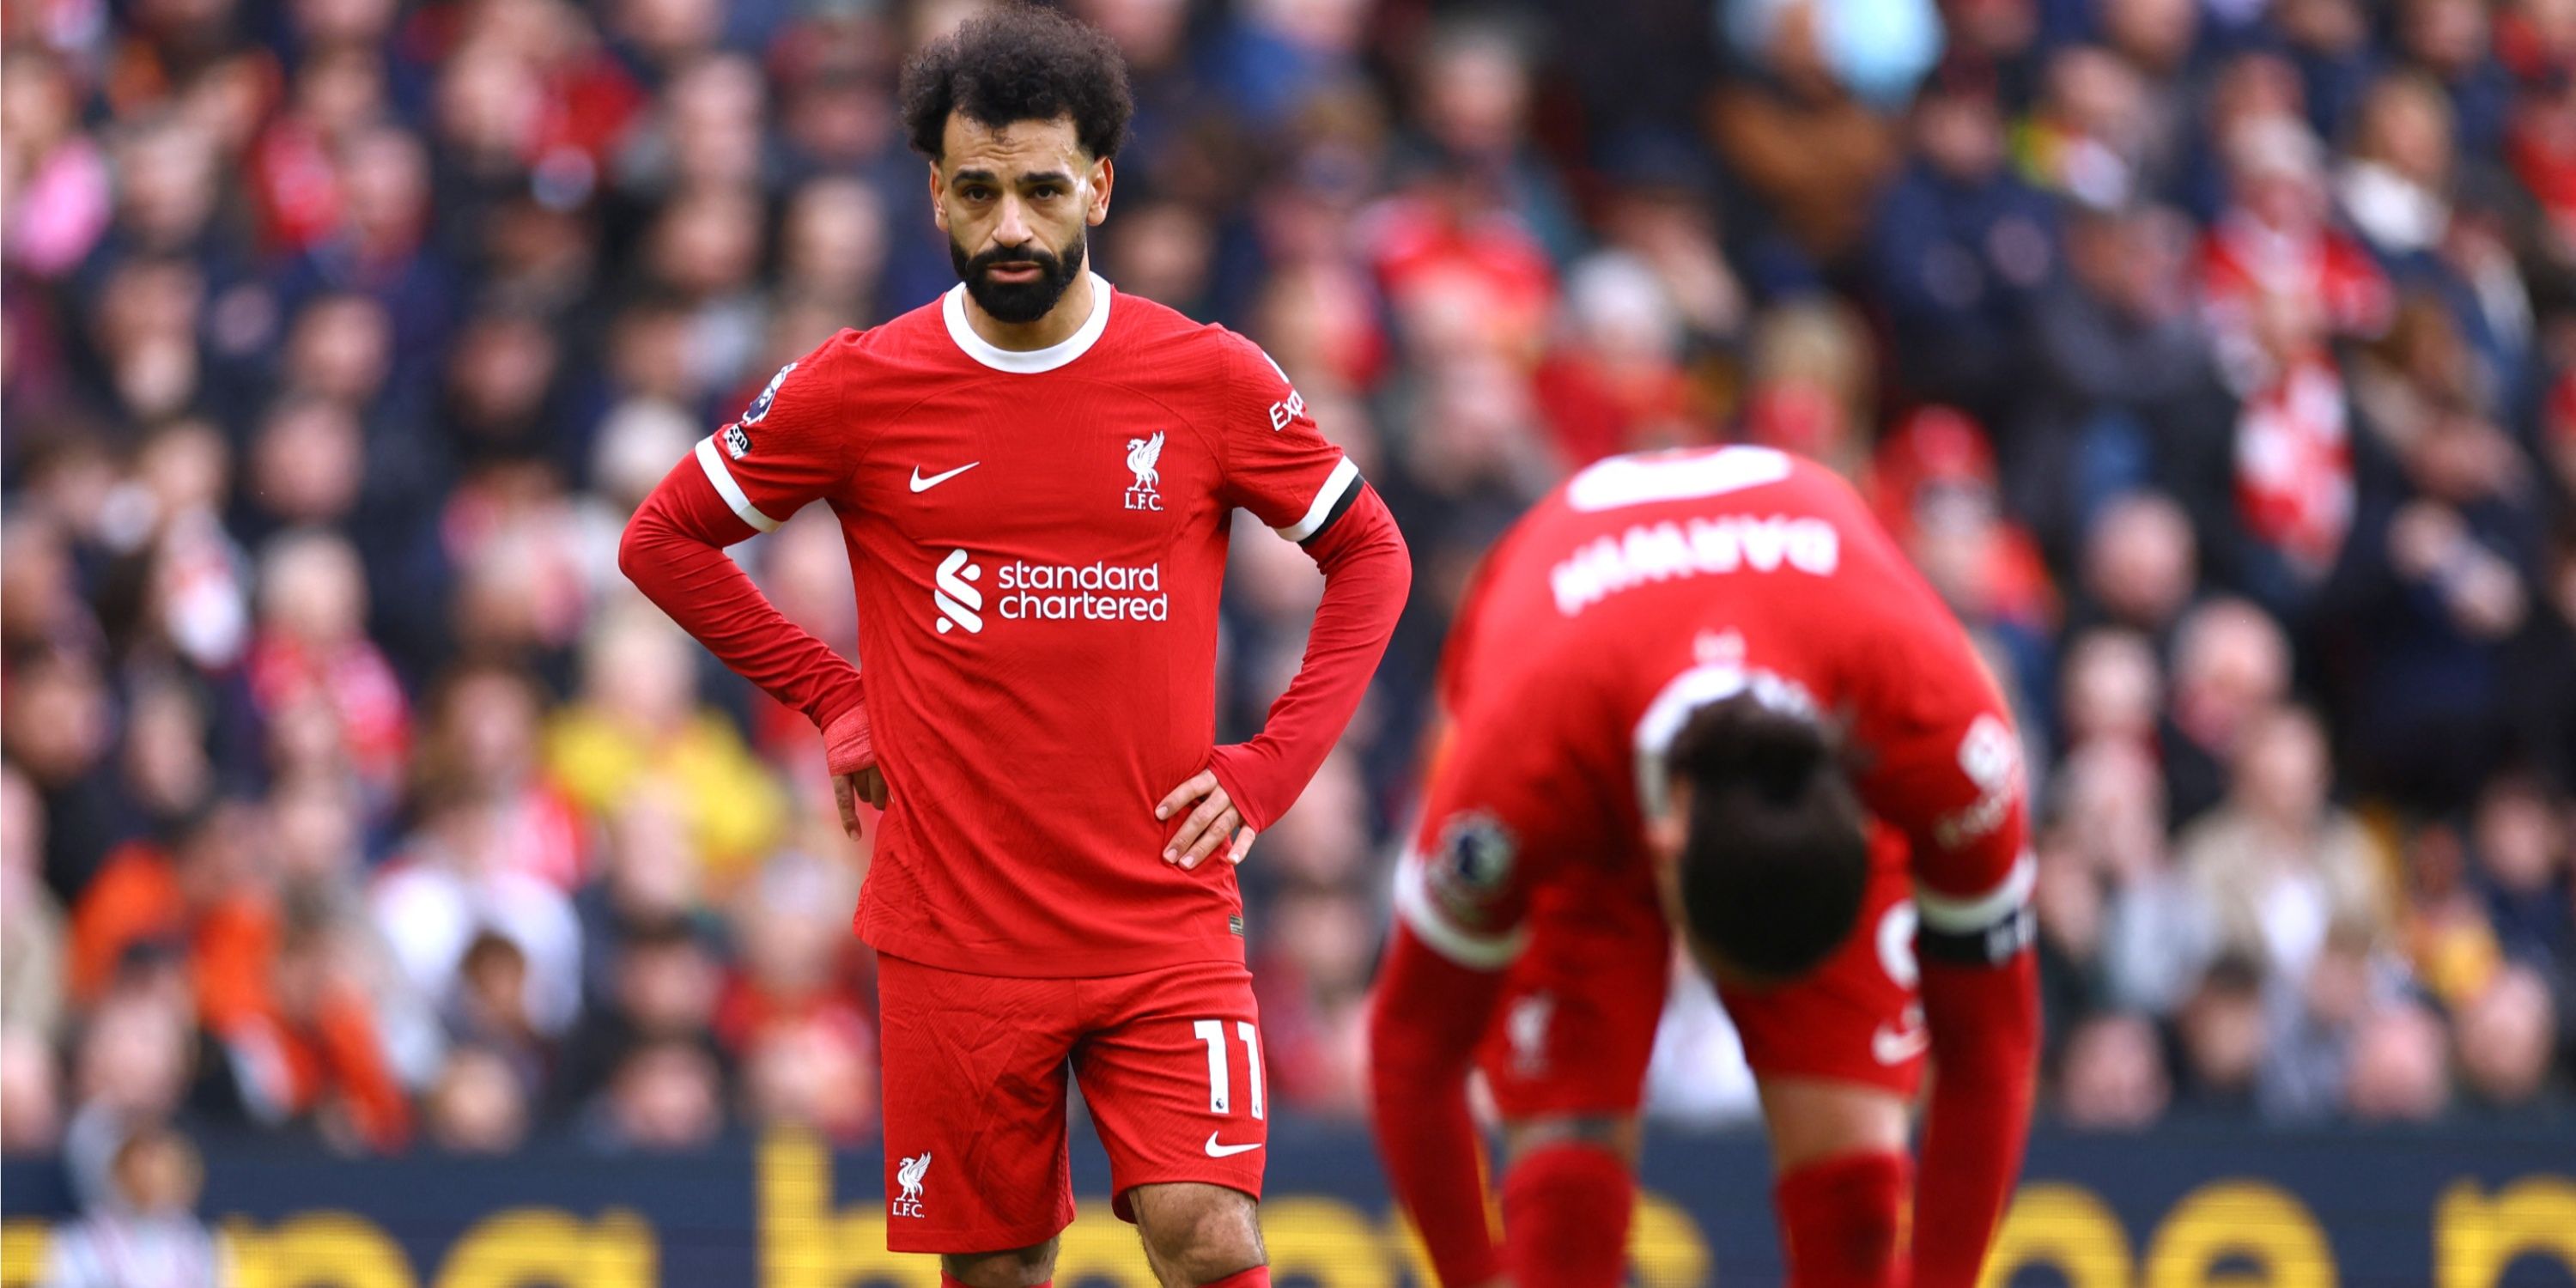 Mohamed Salah looks dejected for Liverpool